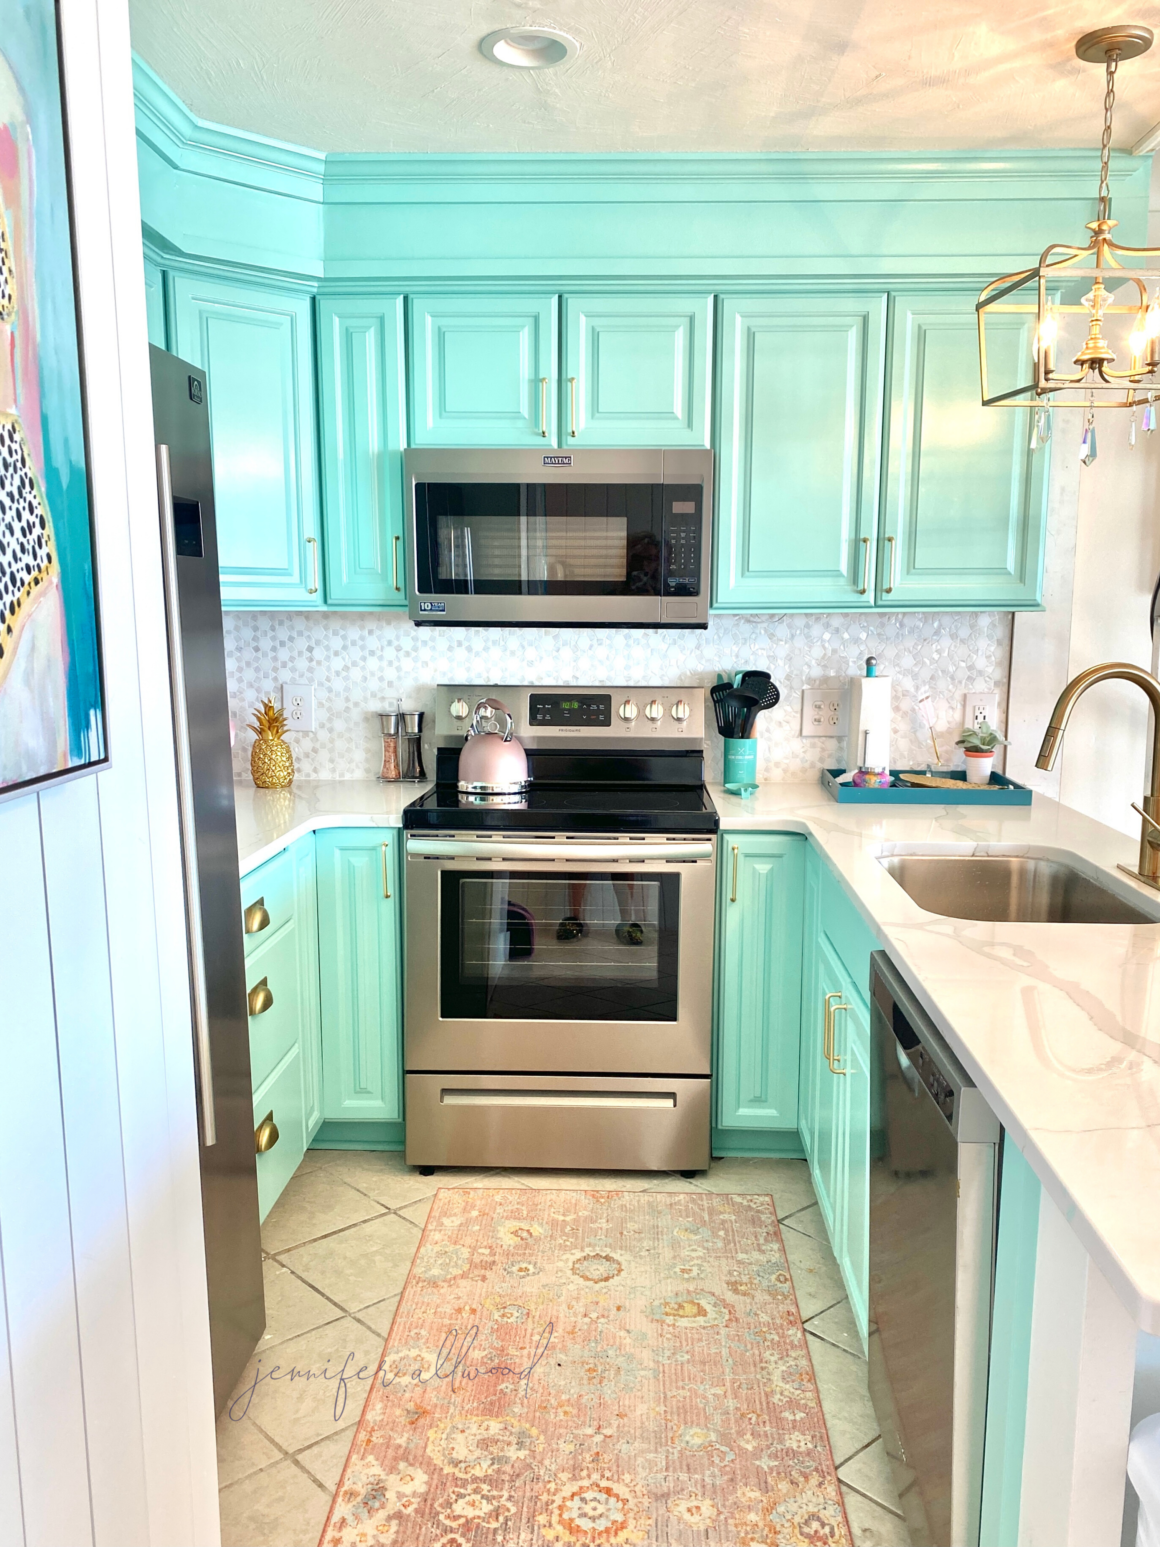 Eye For Design: Oh! Those Tiffany Colored Kitchens